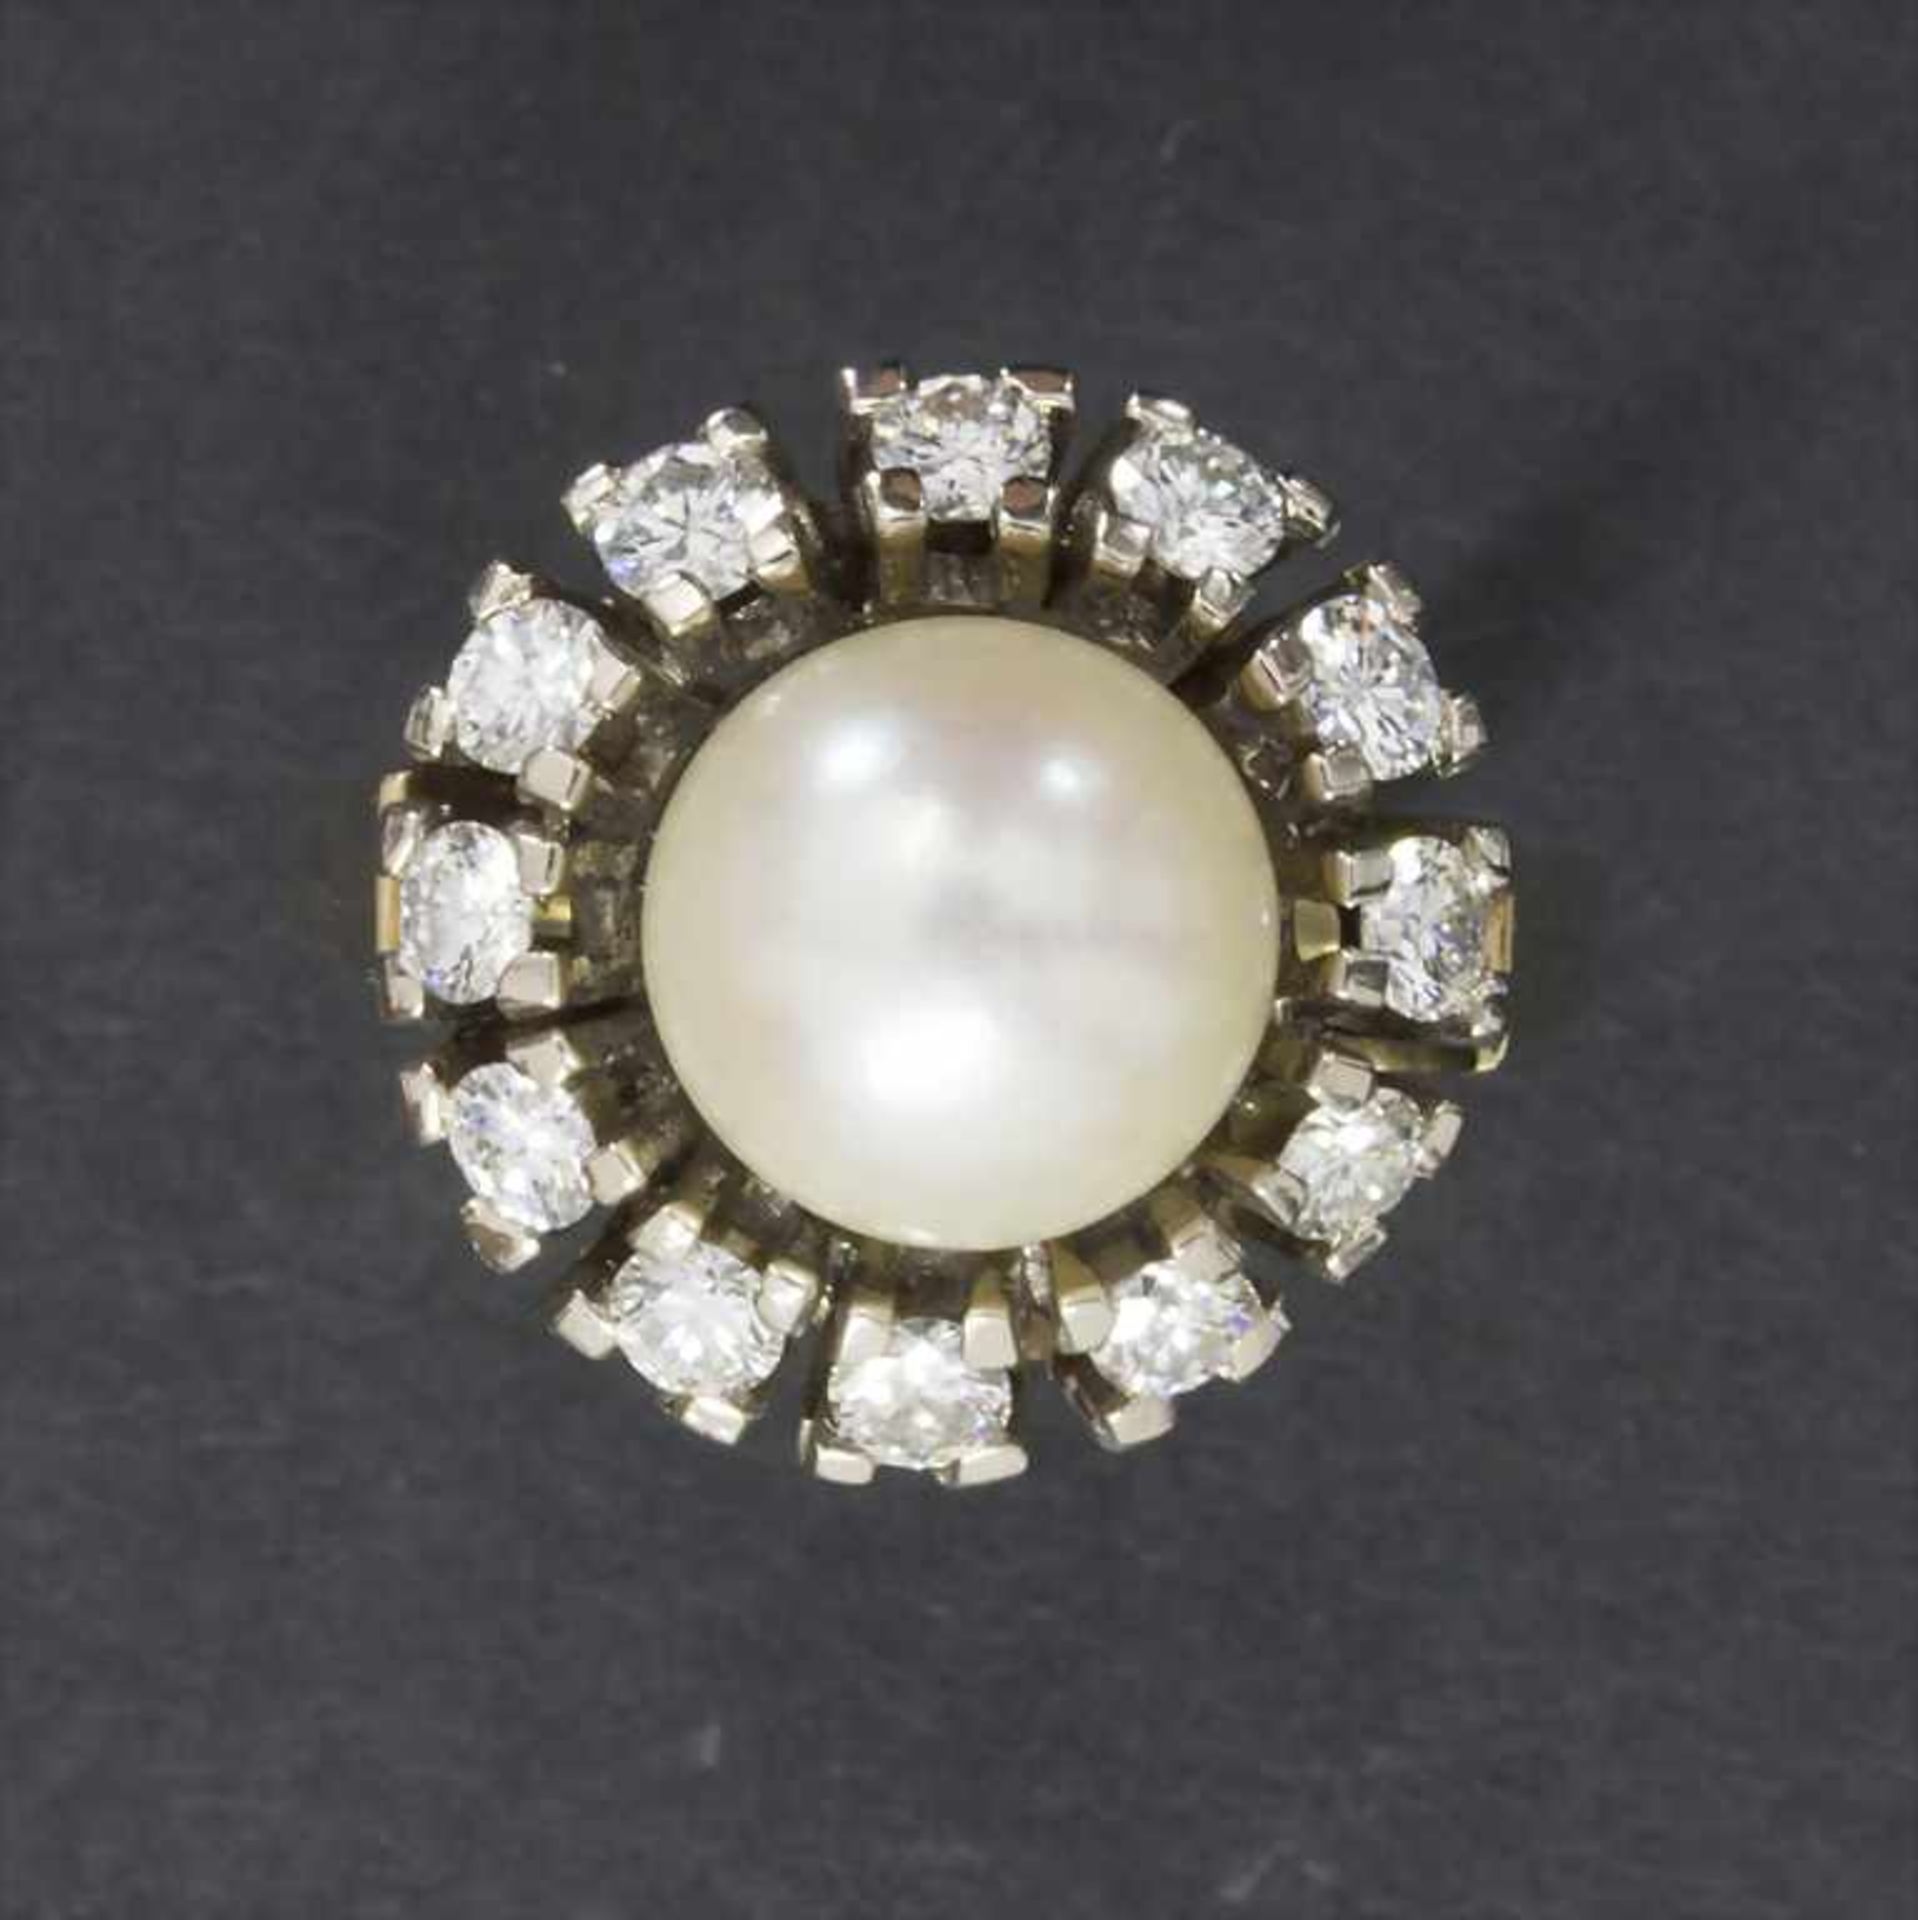 Damenring mit Brillanten und Perle / A ladies ring with brilliants and pearlMaterial: Gelbgold Au